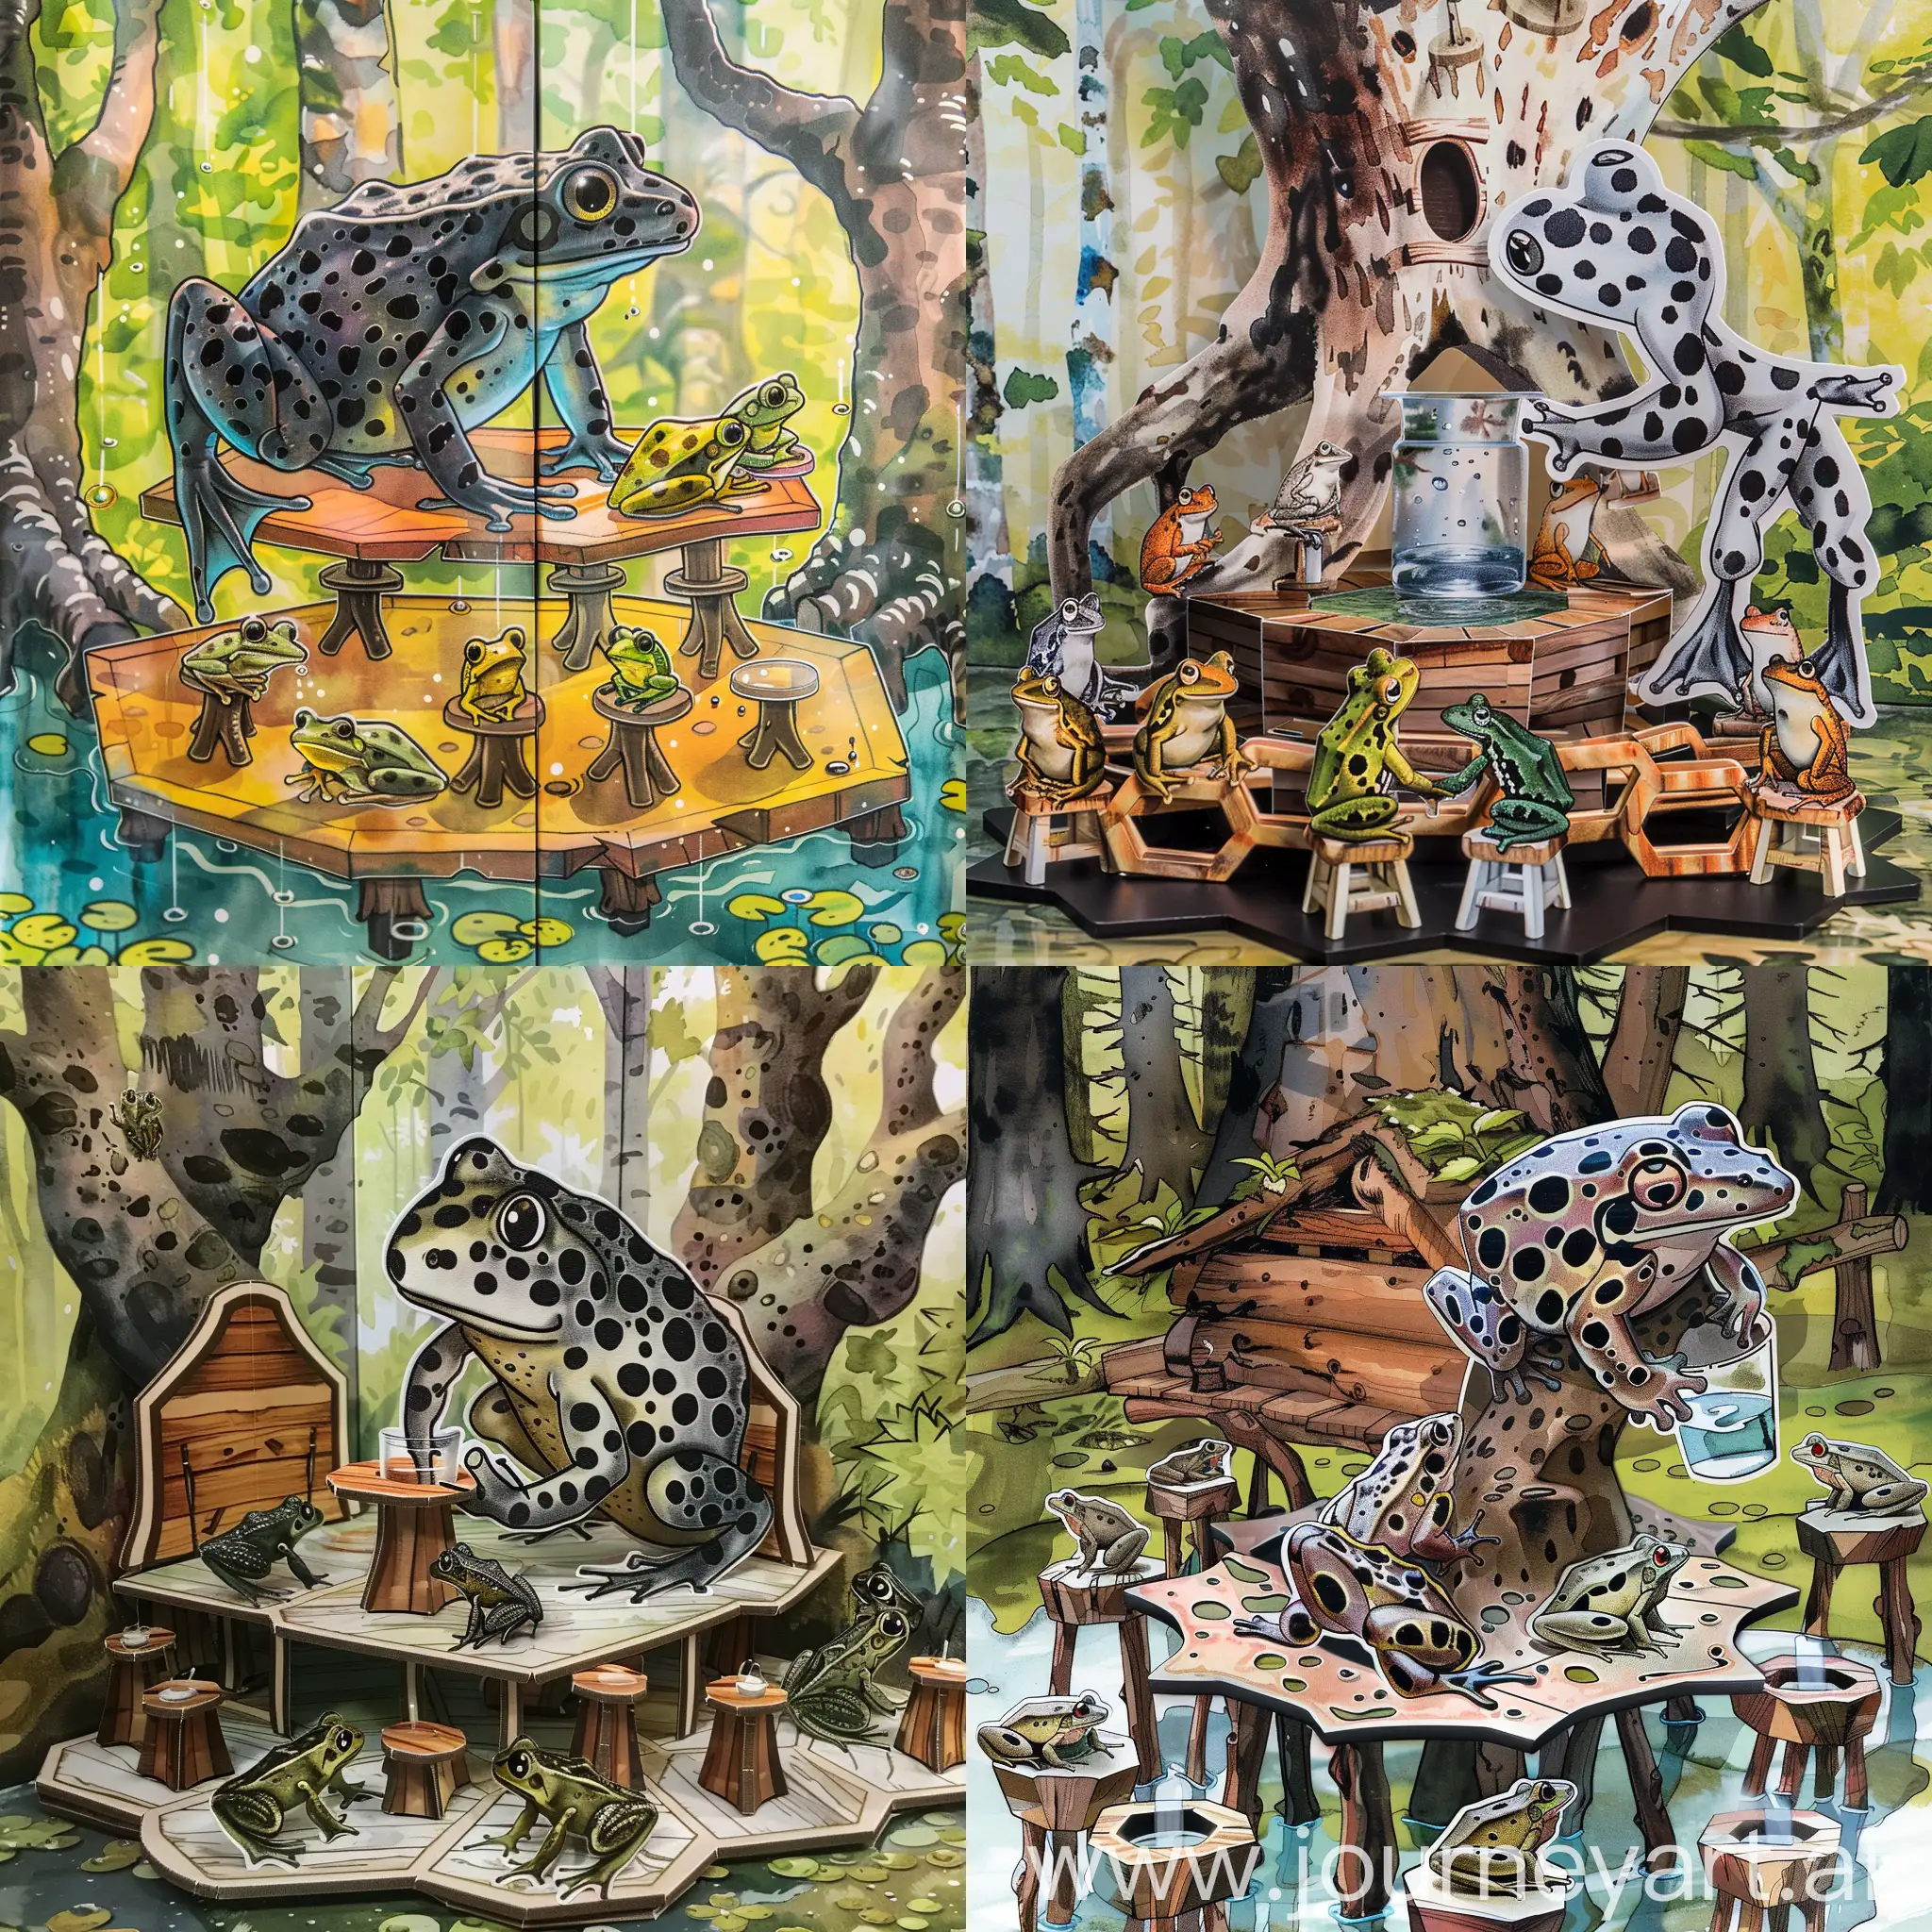 "Forest animal fairy tale style, watercolor, webtoon style, hexagonal log cabin, pop-up drinking bar, tree cup, ((large black-spotted frog, focal point, several small tree frogs sitting on stools drinking water)), colorful background, charming and friendly characters, captures the eye and sparks young readers' imagination.